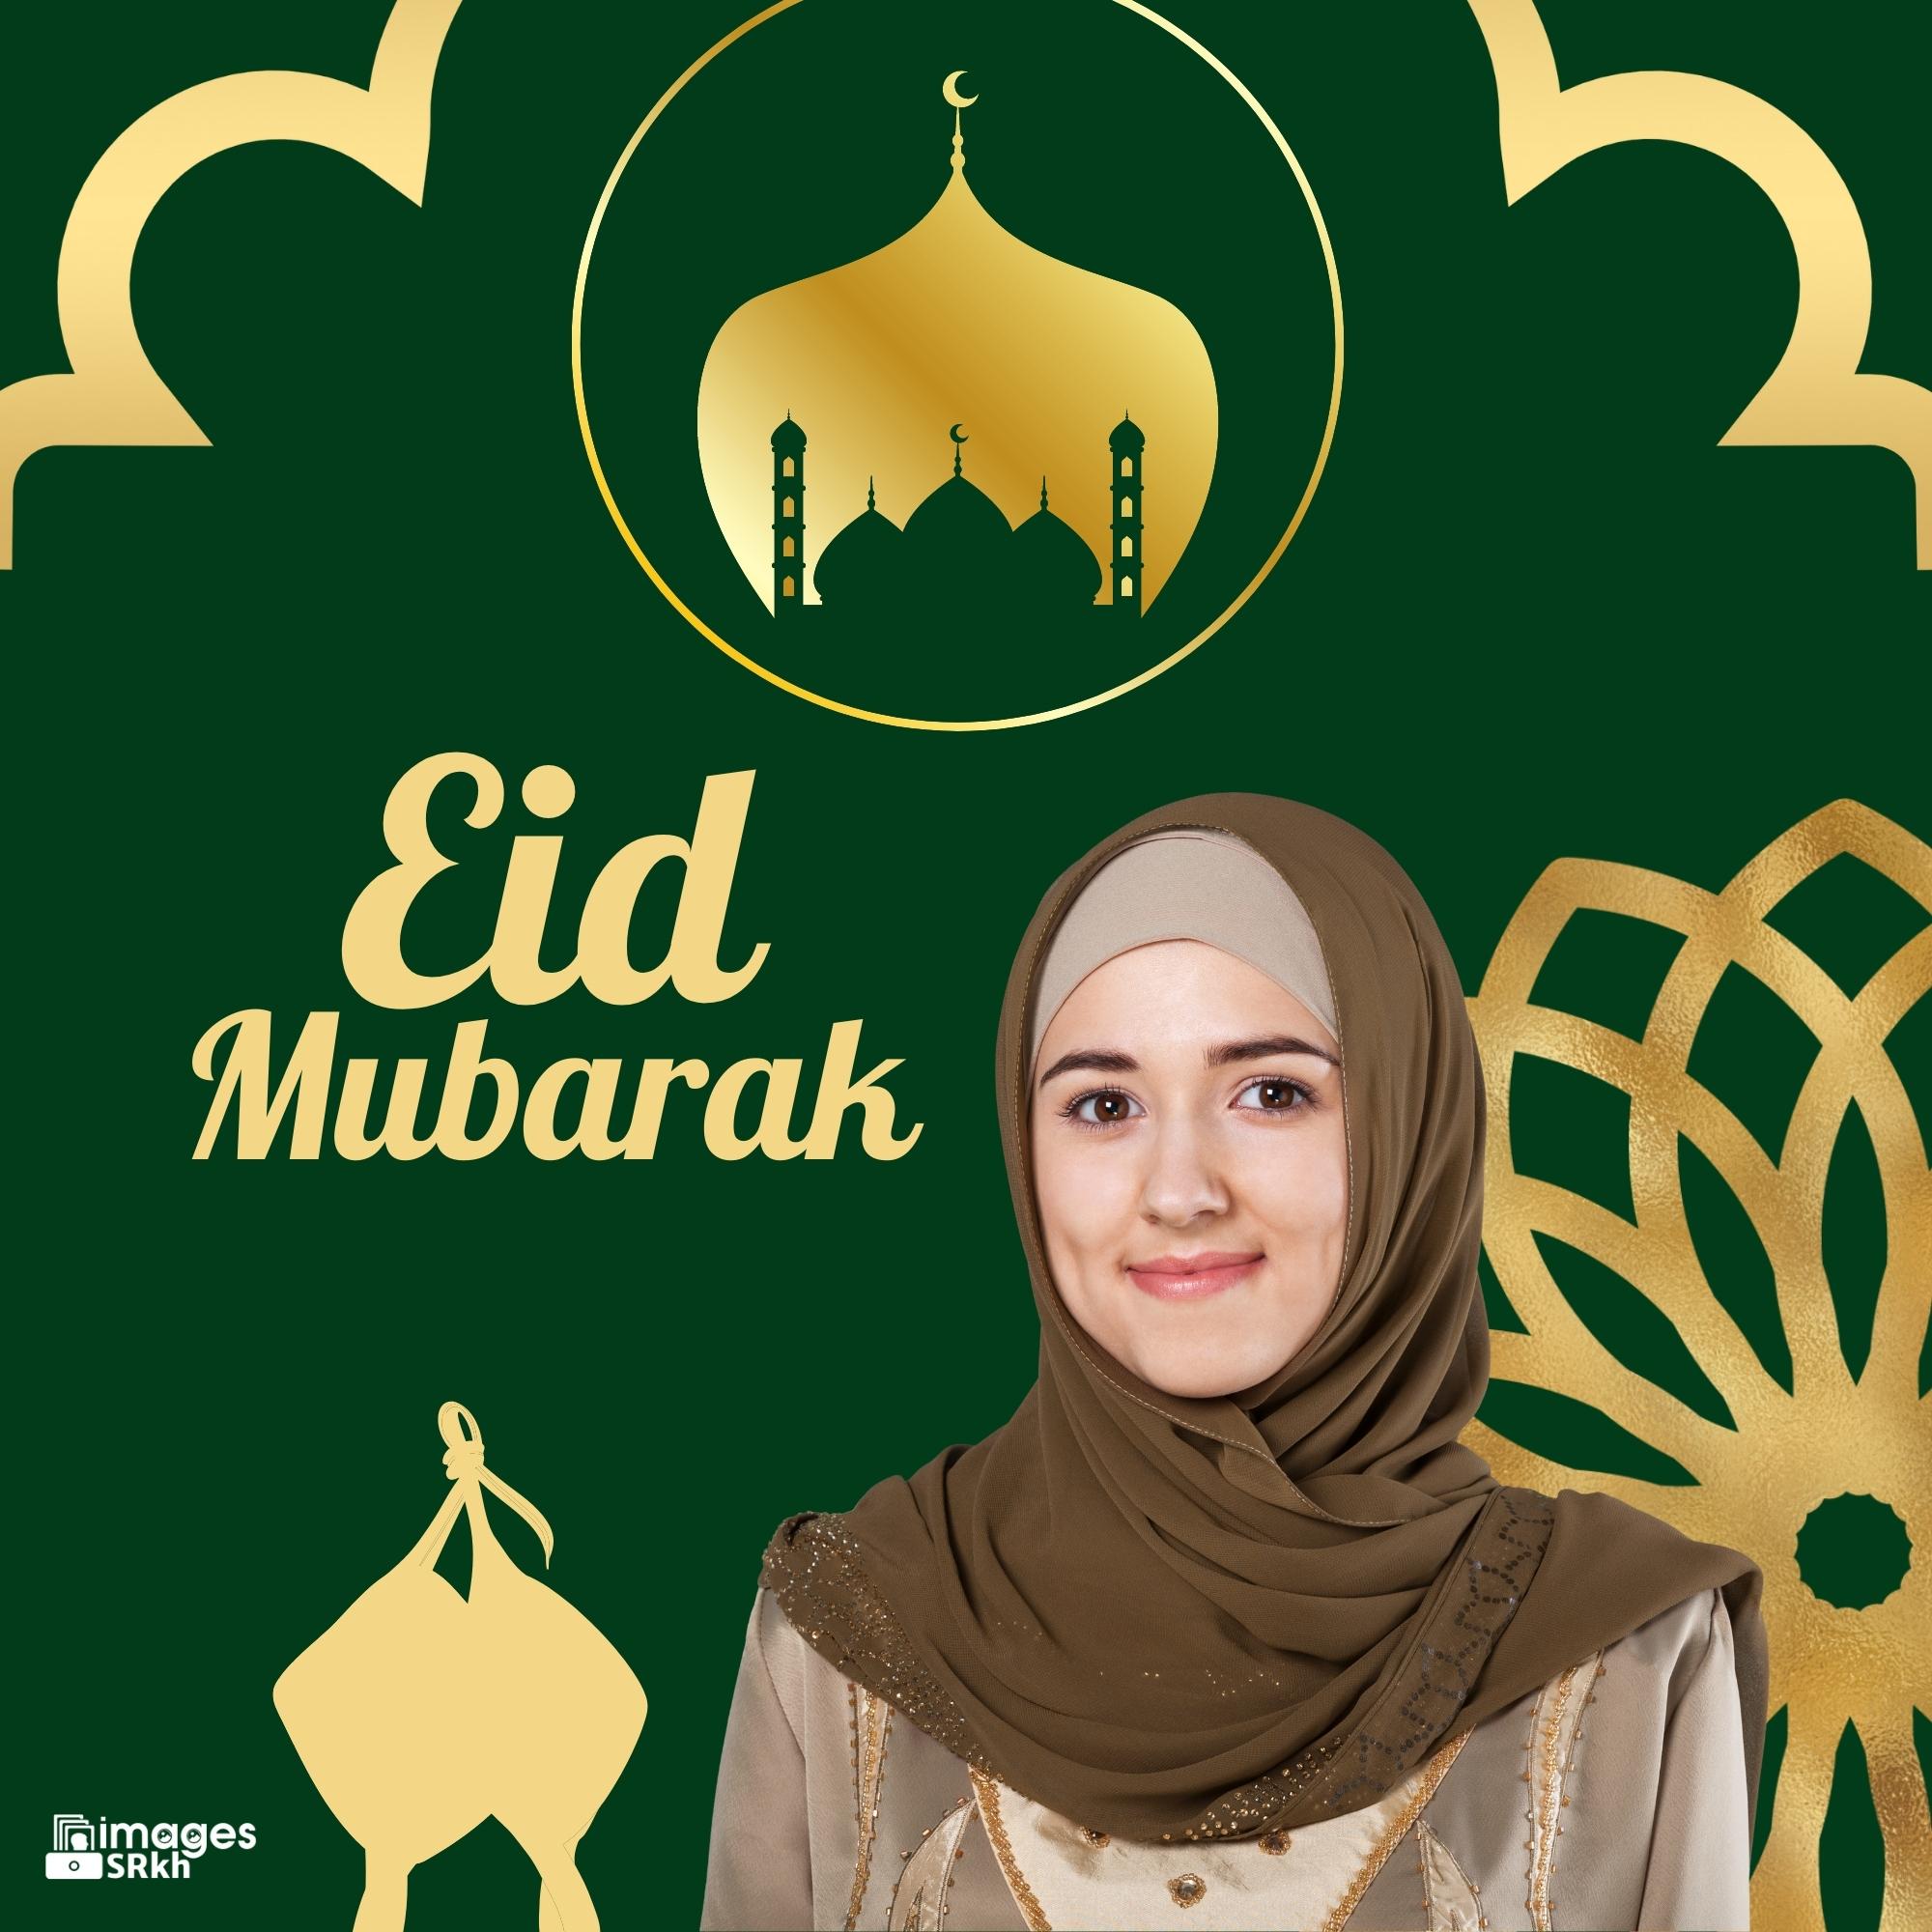 Pictures Eid Mubarak (2) | Download free in Hd Quality | imagesSRkh